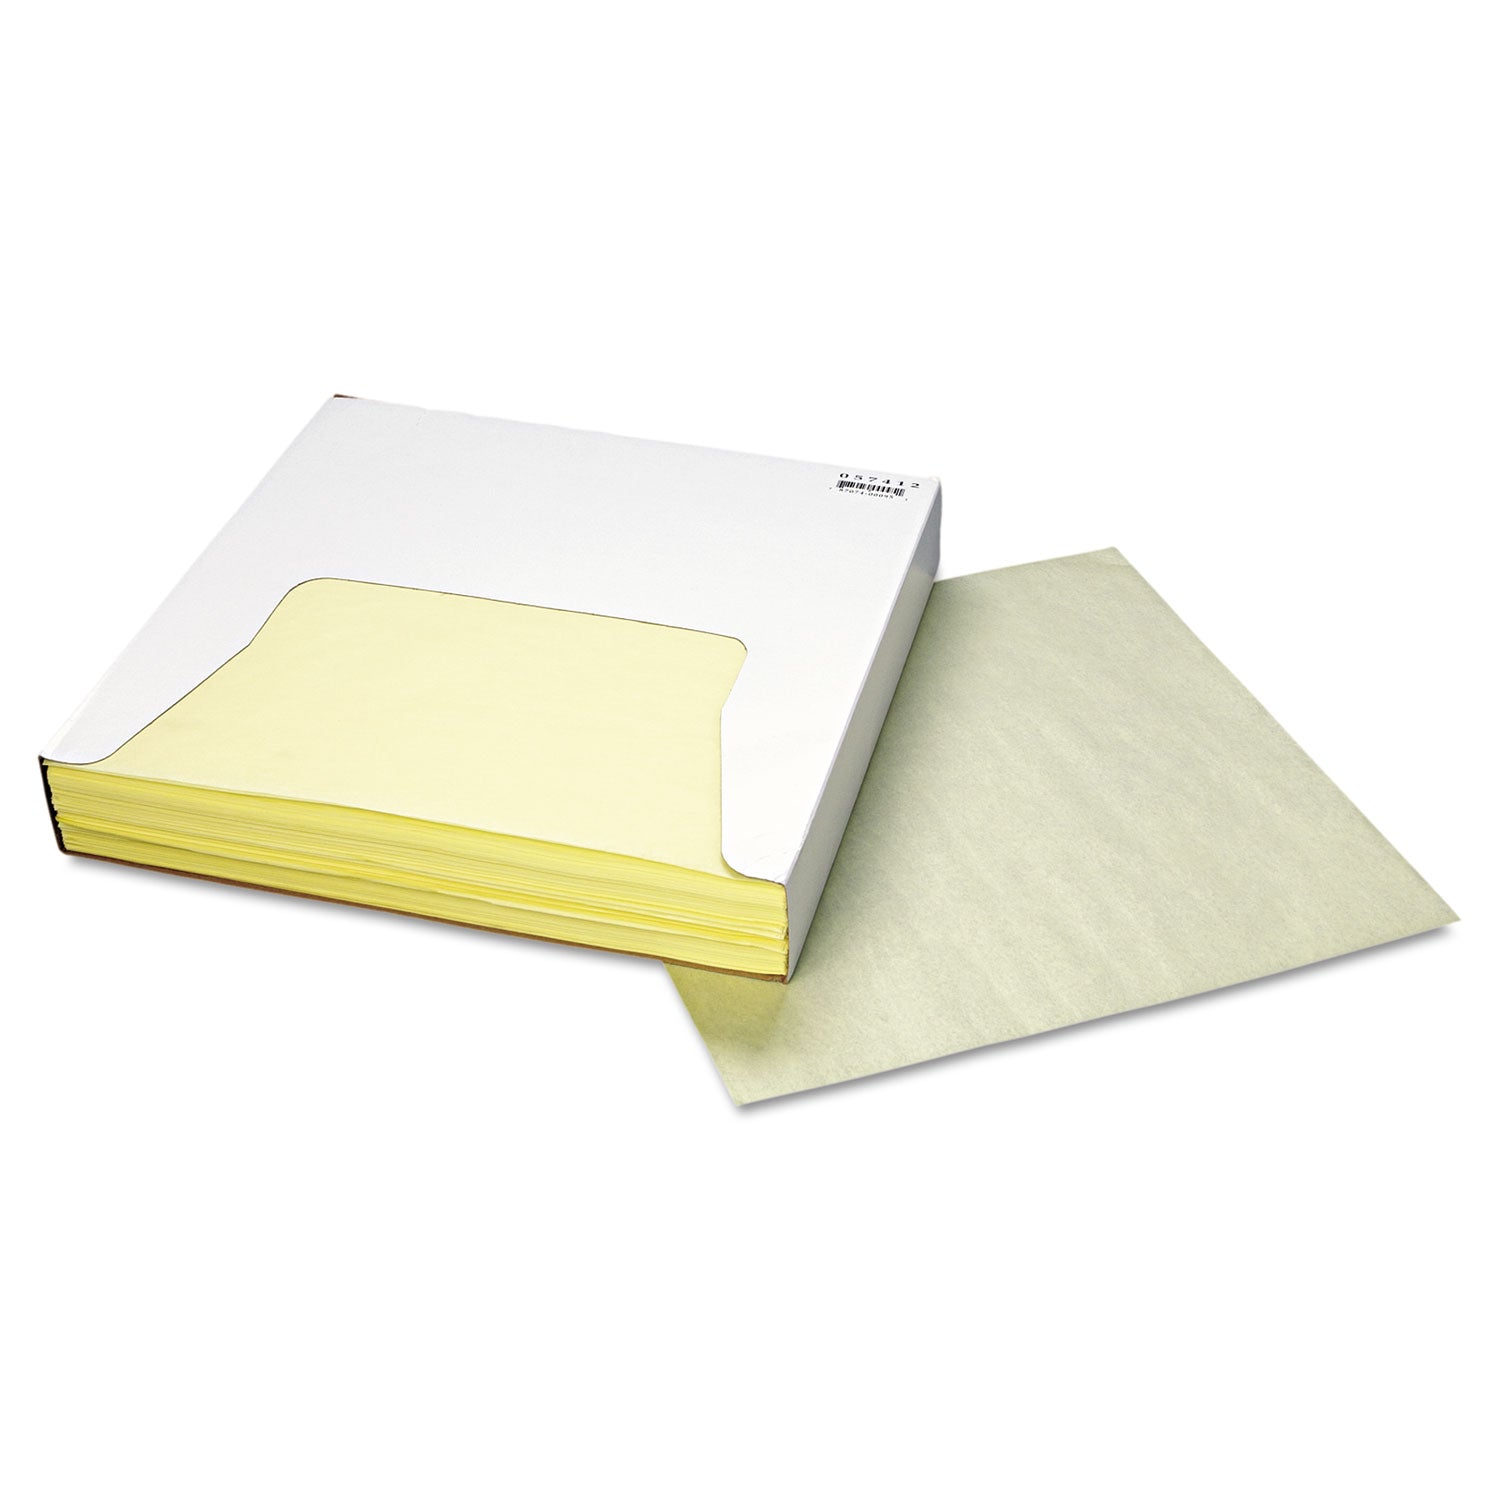 Grease-Resistant Paper Wraps and Liners, 12 x 12, Yellow, 1,000/Box, 5 Boxes/Carton - 